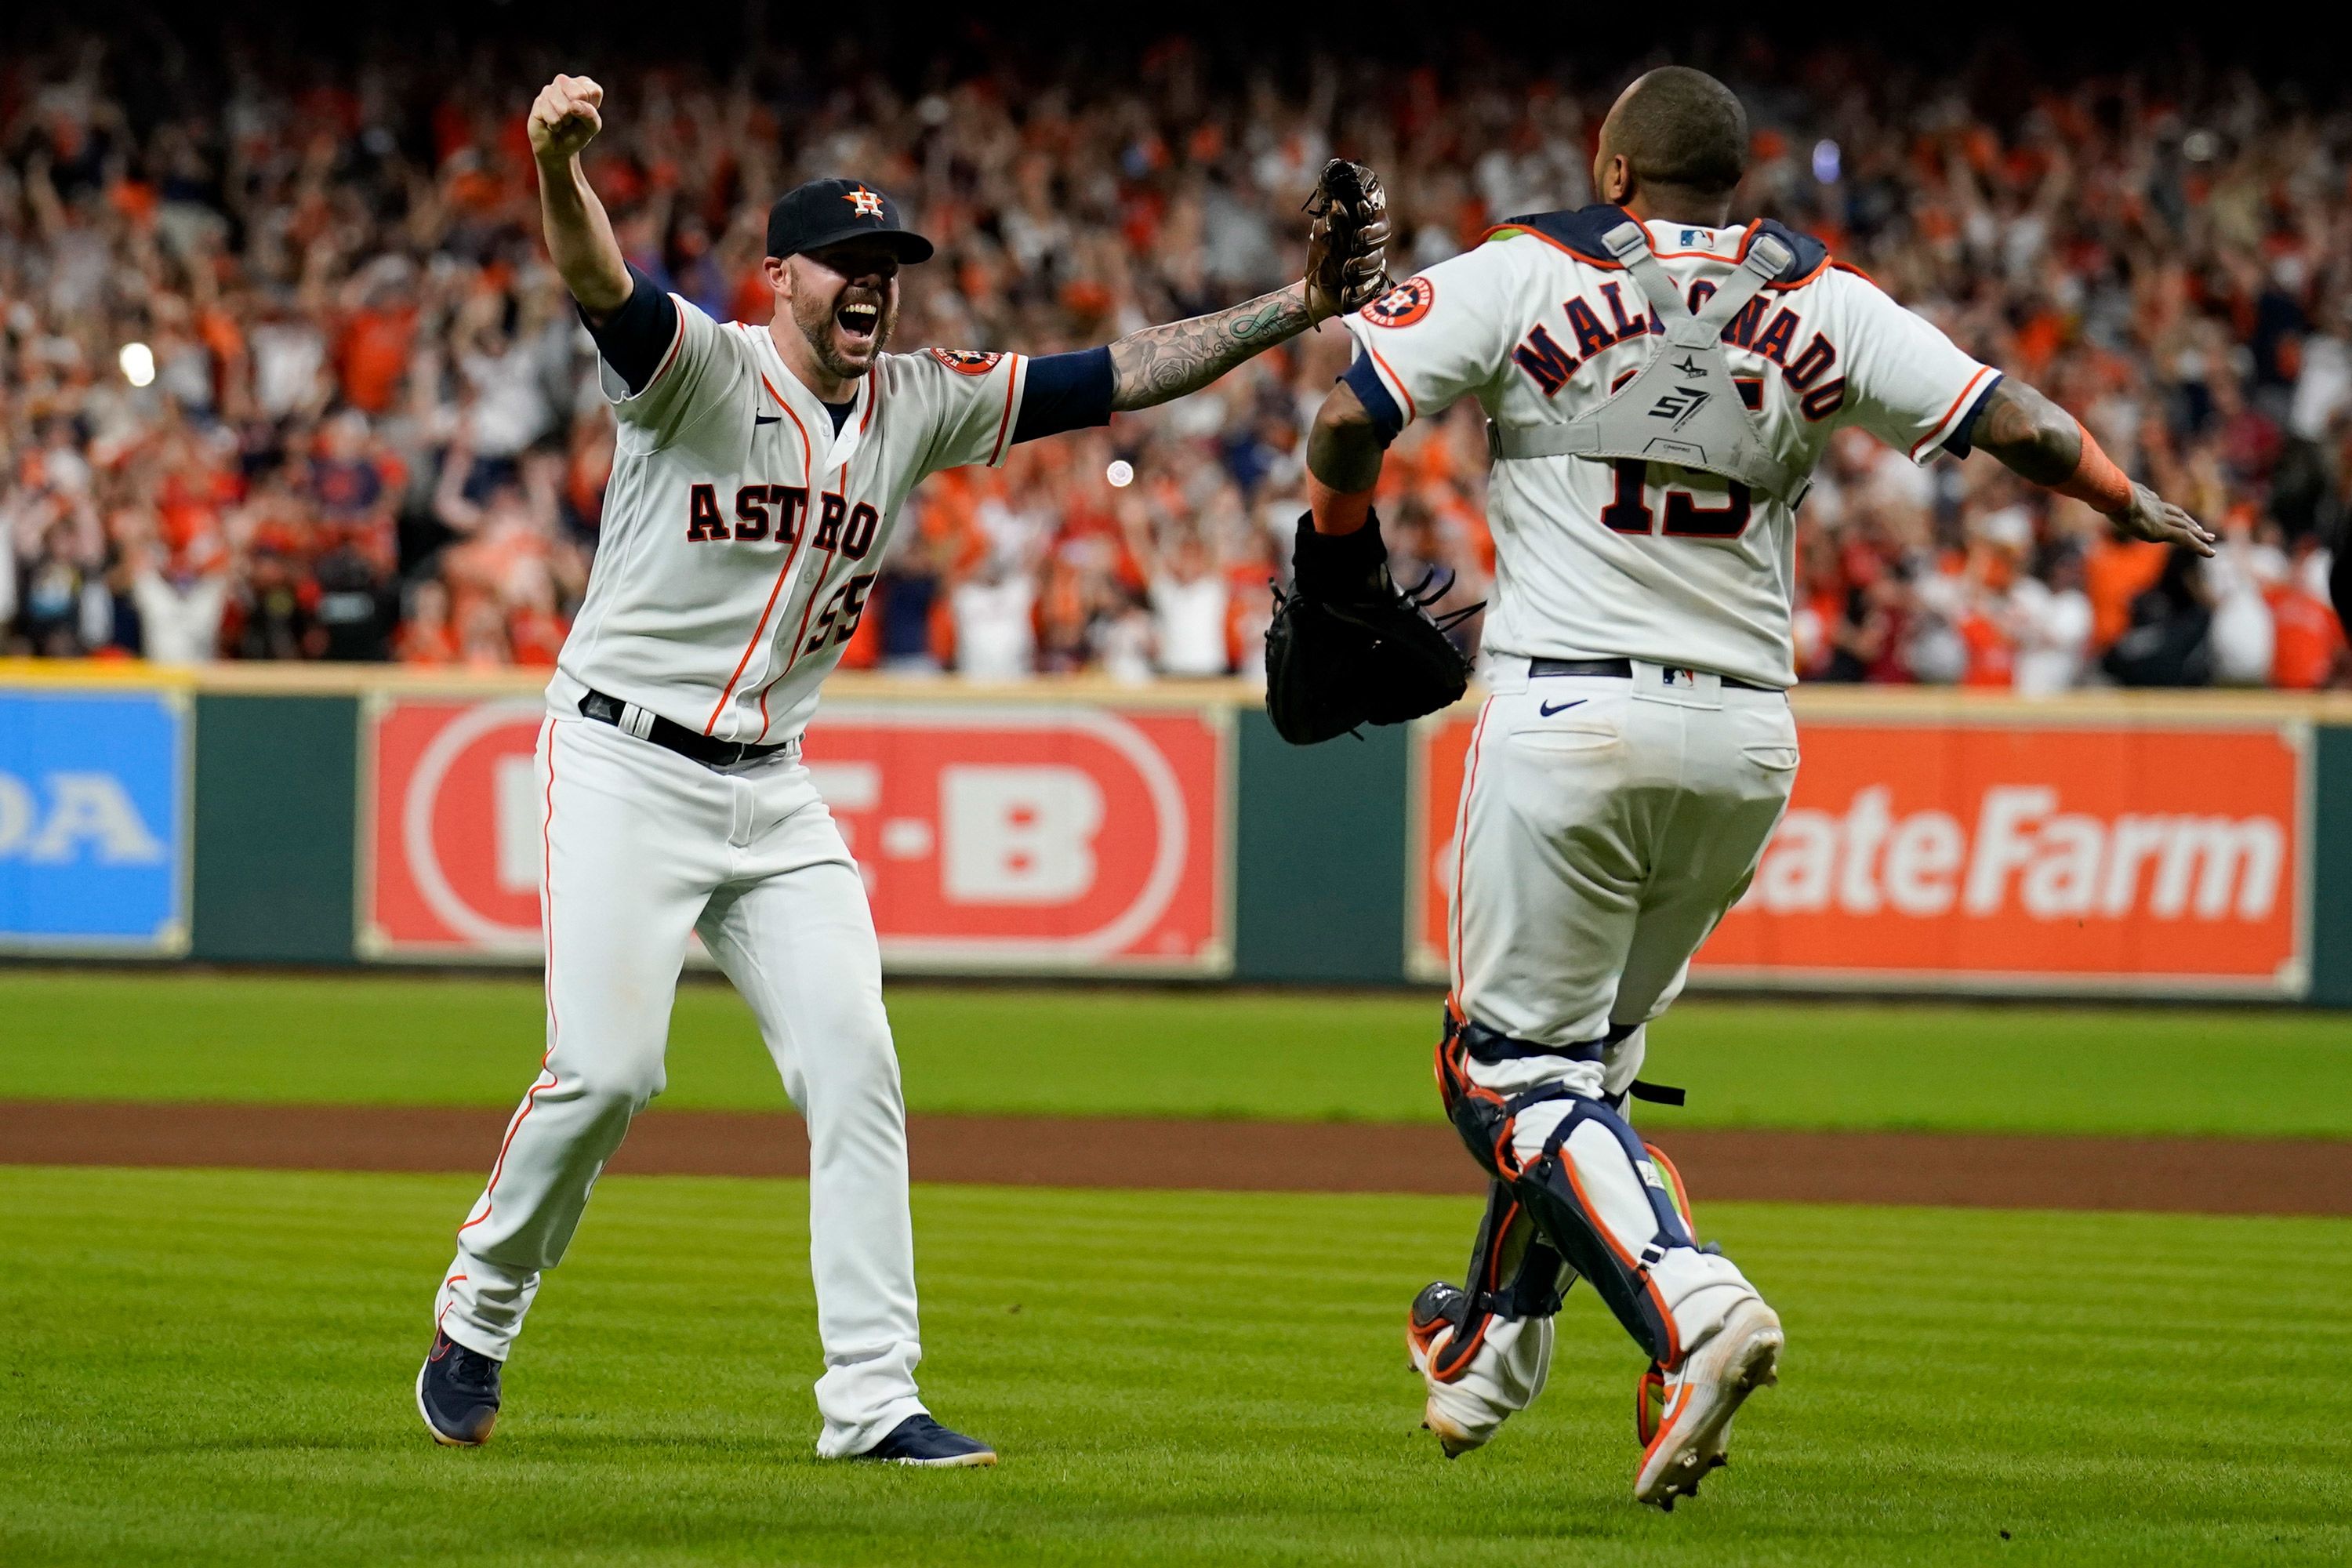 Houston Astros advance to World Series after beating Boston Red Sox in ALCS